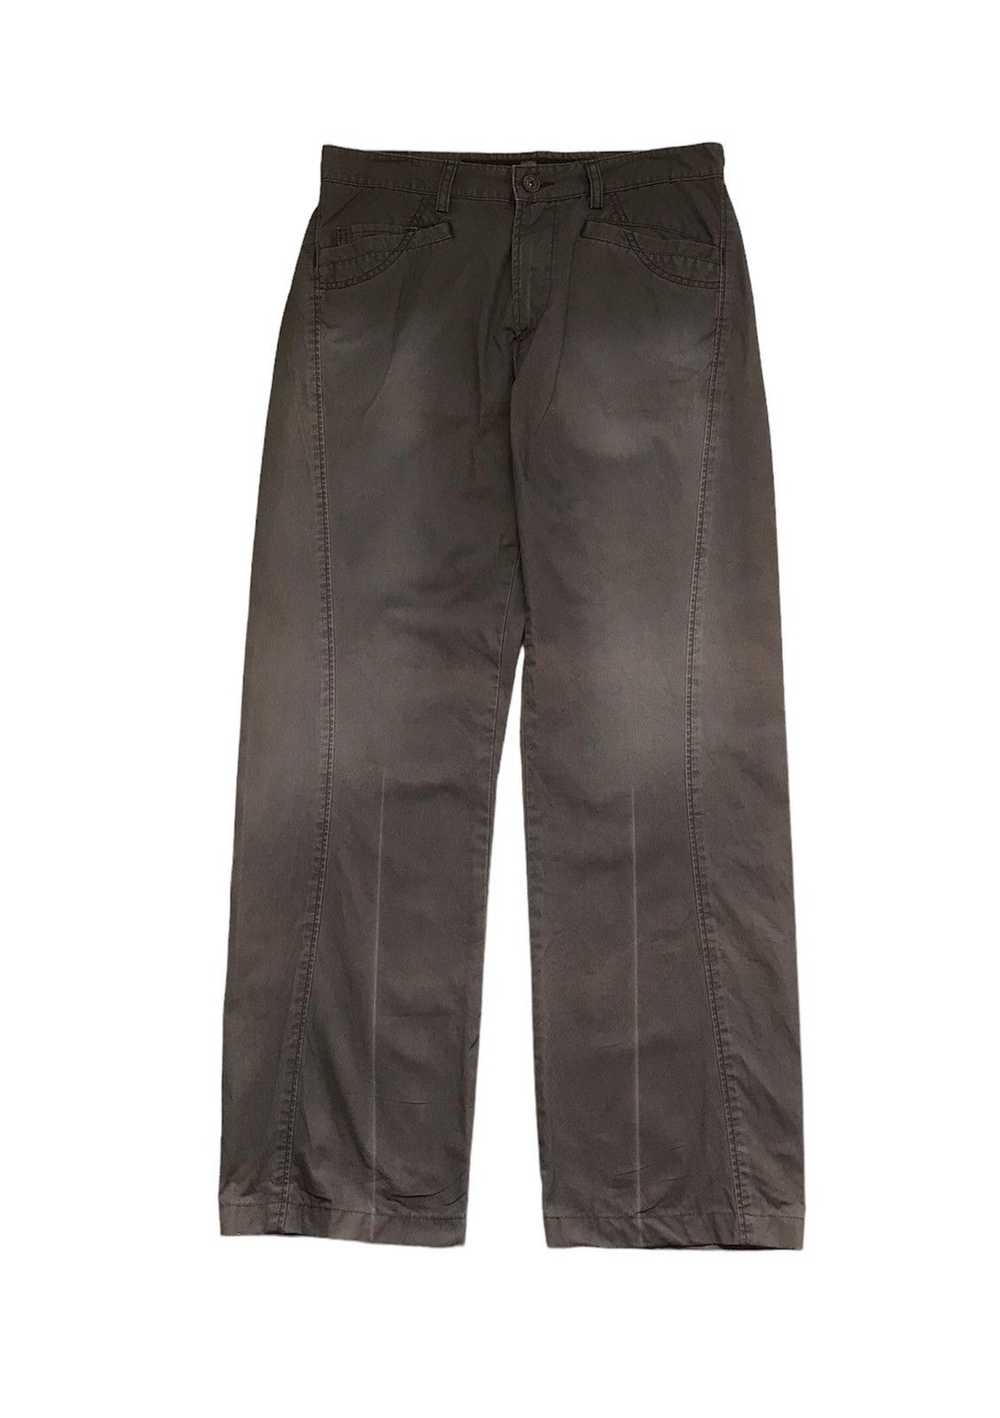 Marithe Francois Girbaud MFG Curved Seam Trousers - image 1